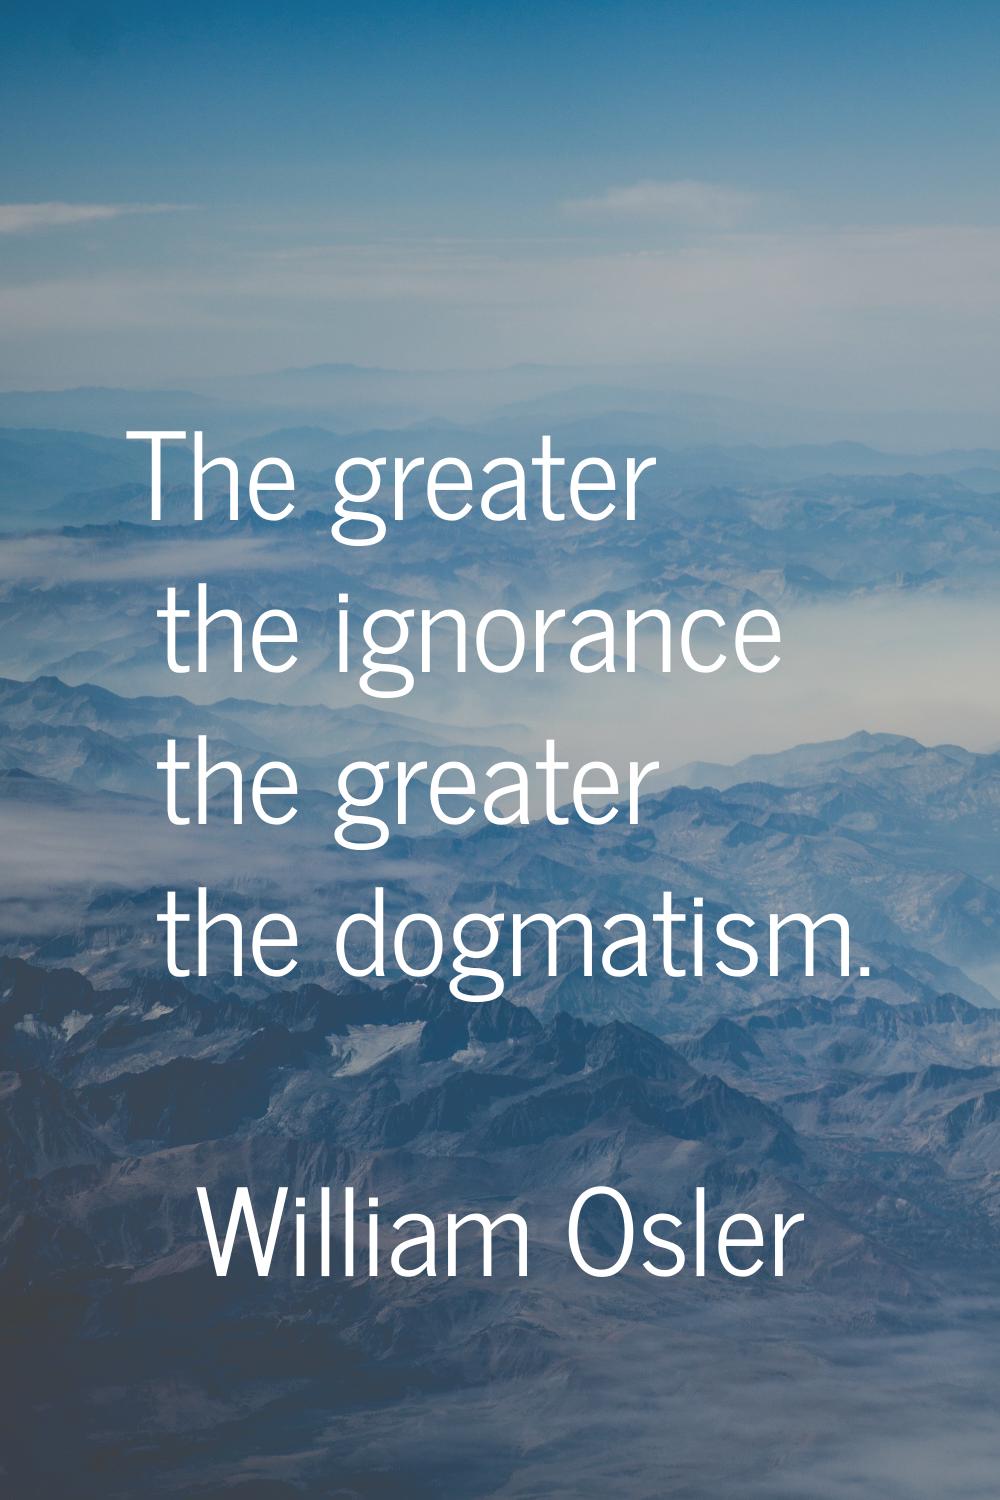 The greater the ignorance the greater the dogmatism.